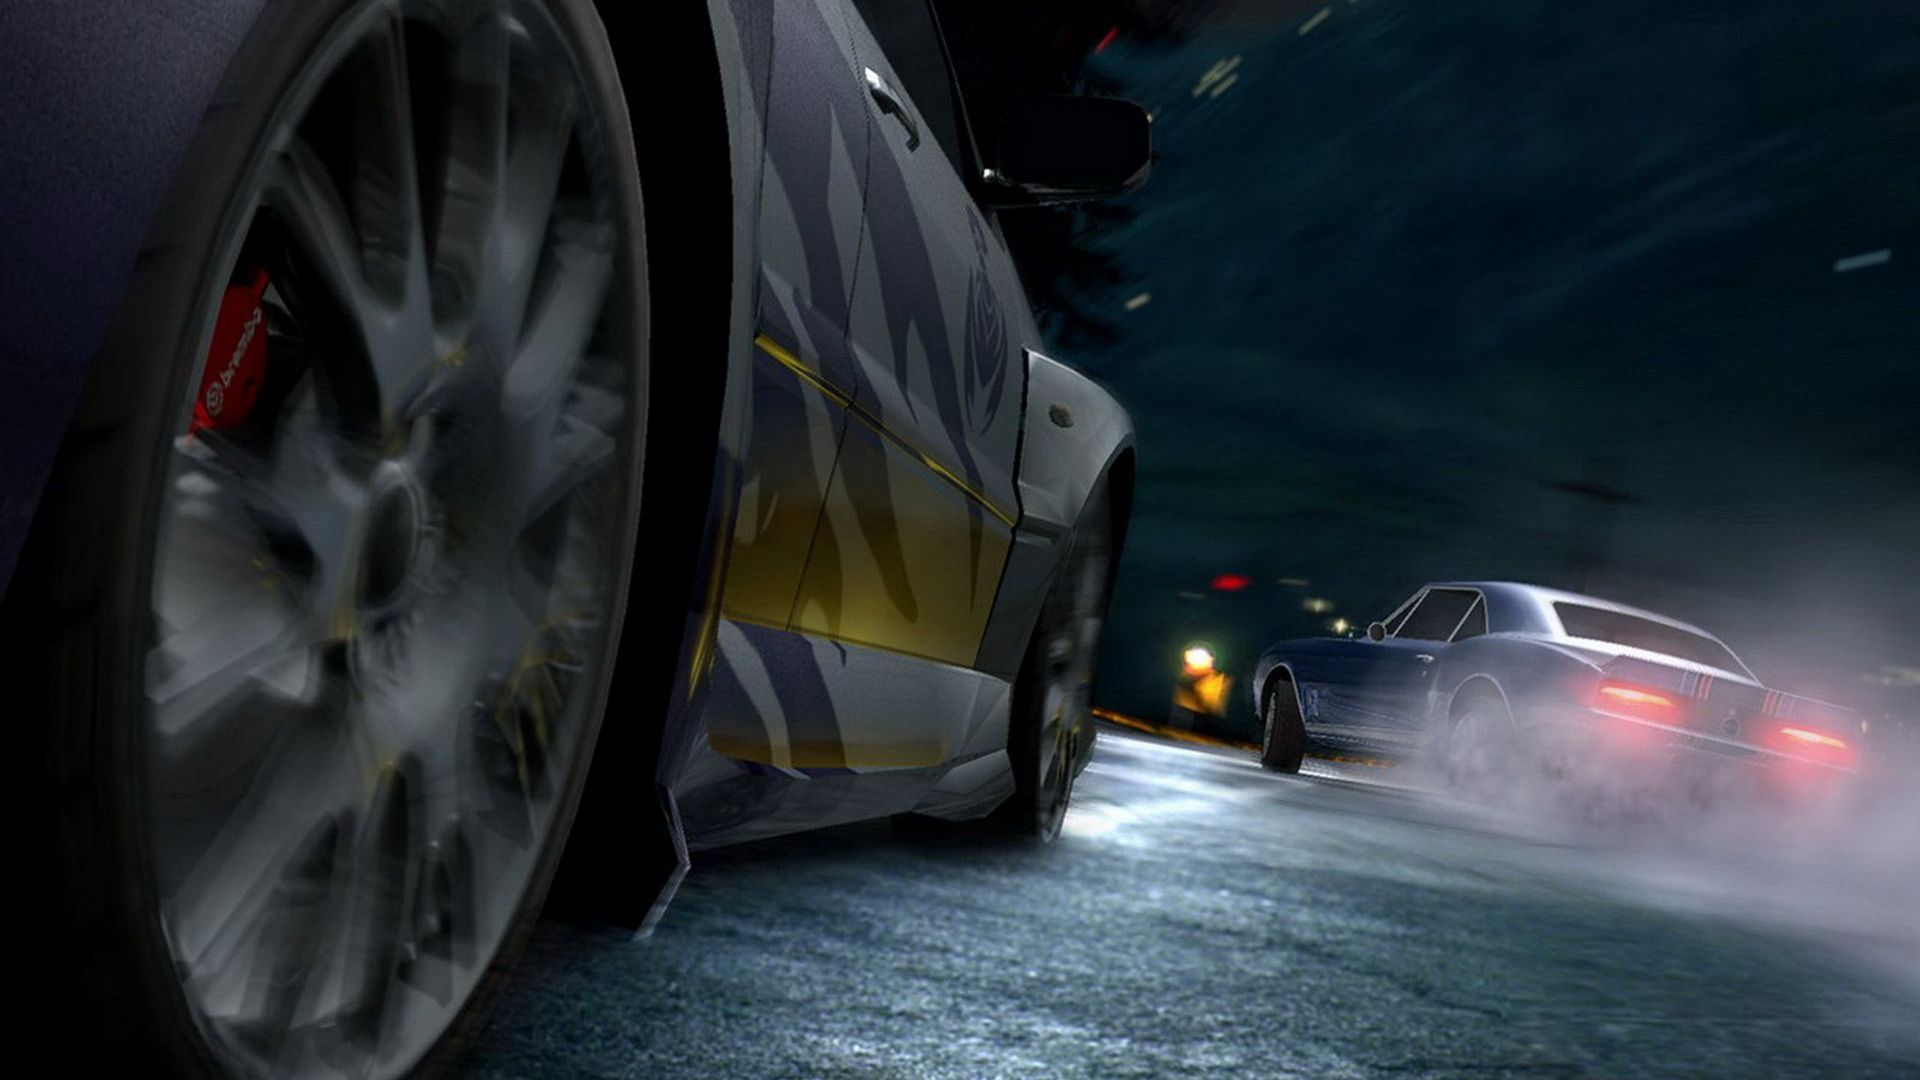 Video Game Need for Speed: Carbon HD Wallpaper | Background Image